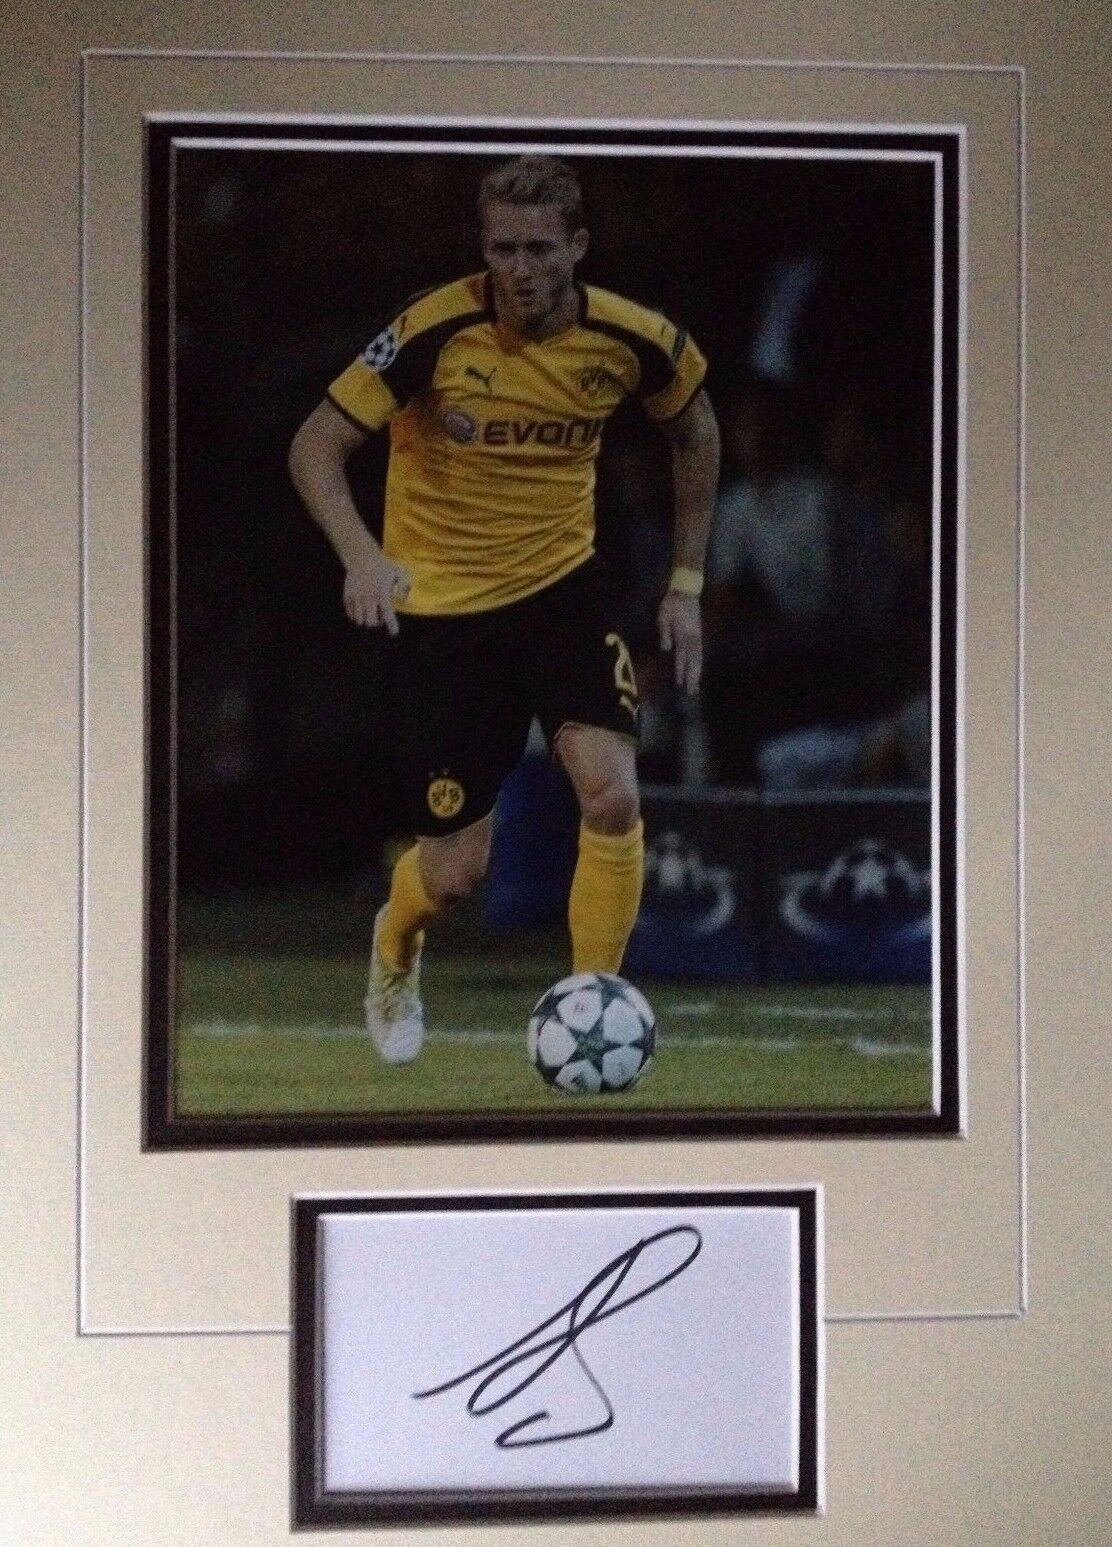 ANDRE SCHURLLE - DORTMUND FOOTBALLER - EXCELLENT SIGNED COLOUR Photo Poster painting DISPLAY